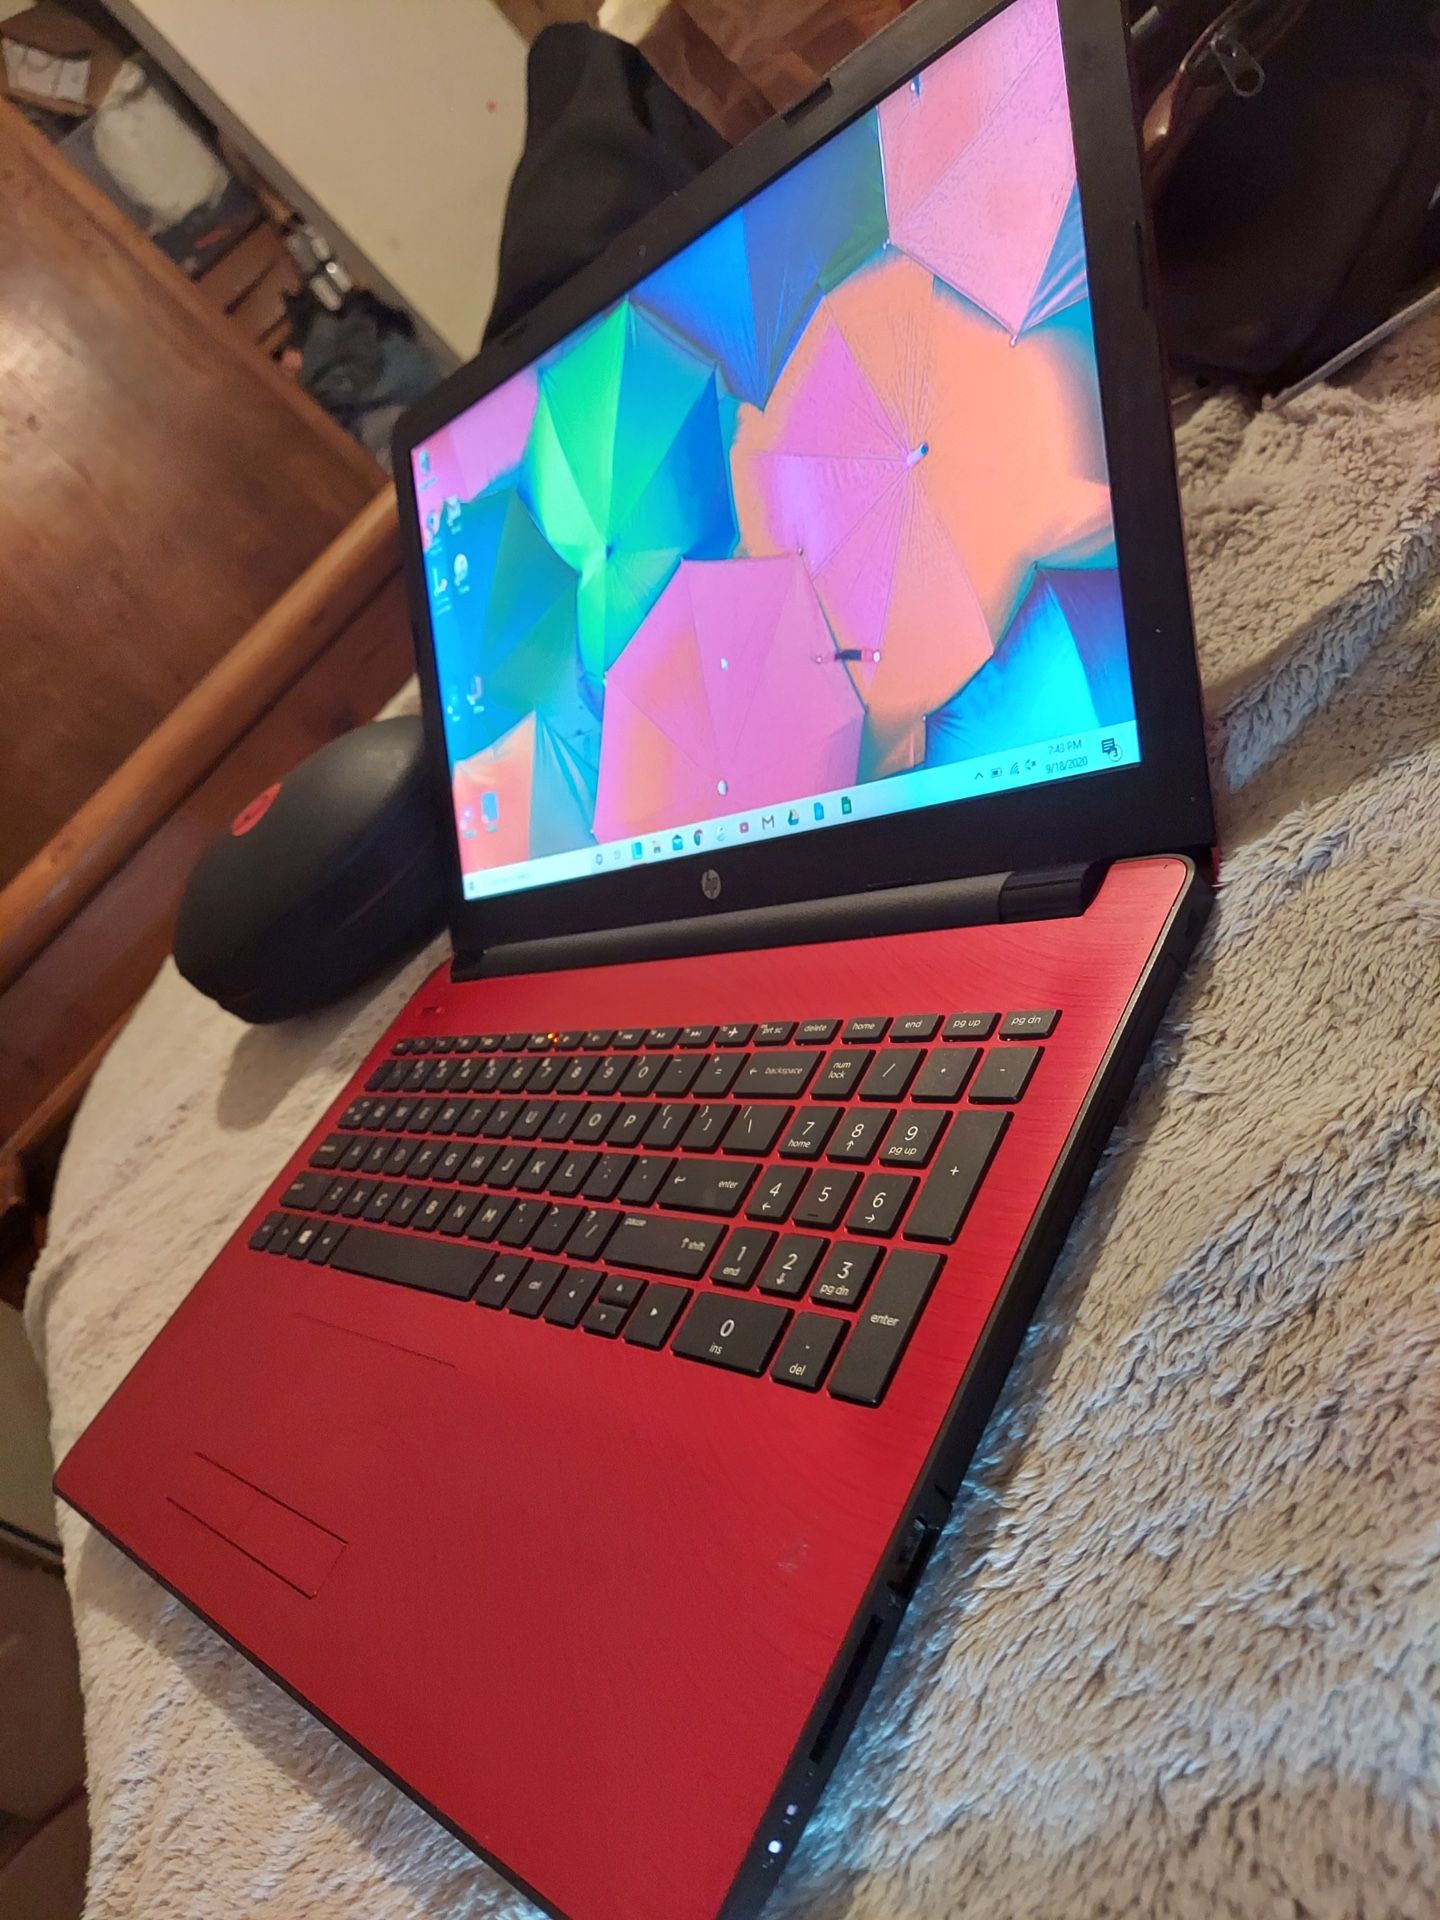 HP Late 2019 Laptop 17.1 “ LED Like New Intel Quad core CPU, 4GB RAM, 1TB HDD Windows 10 Pro With Extras Like New